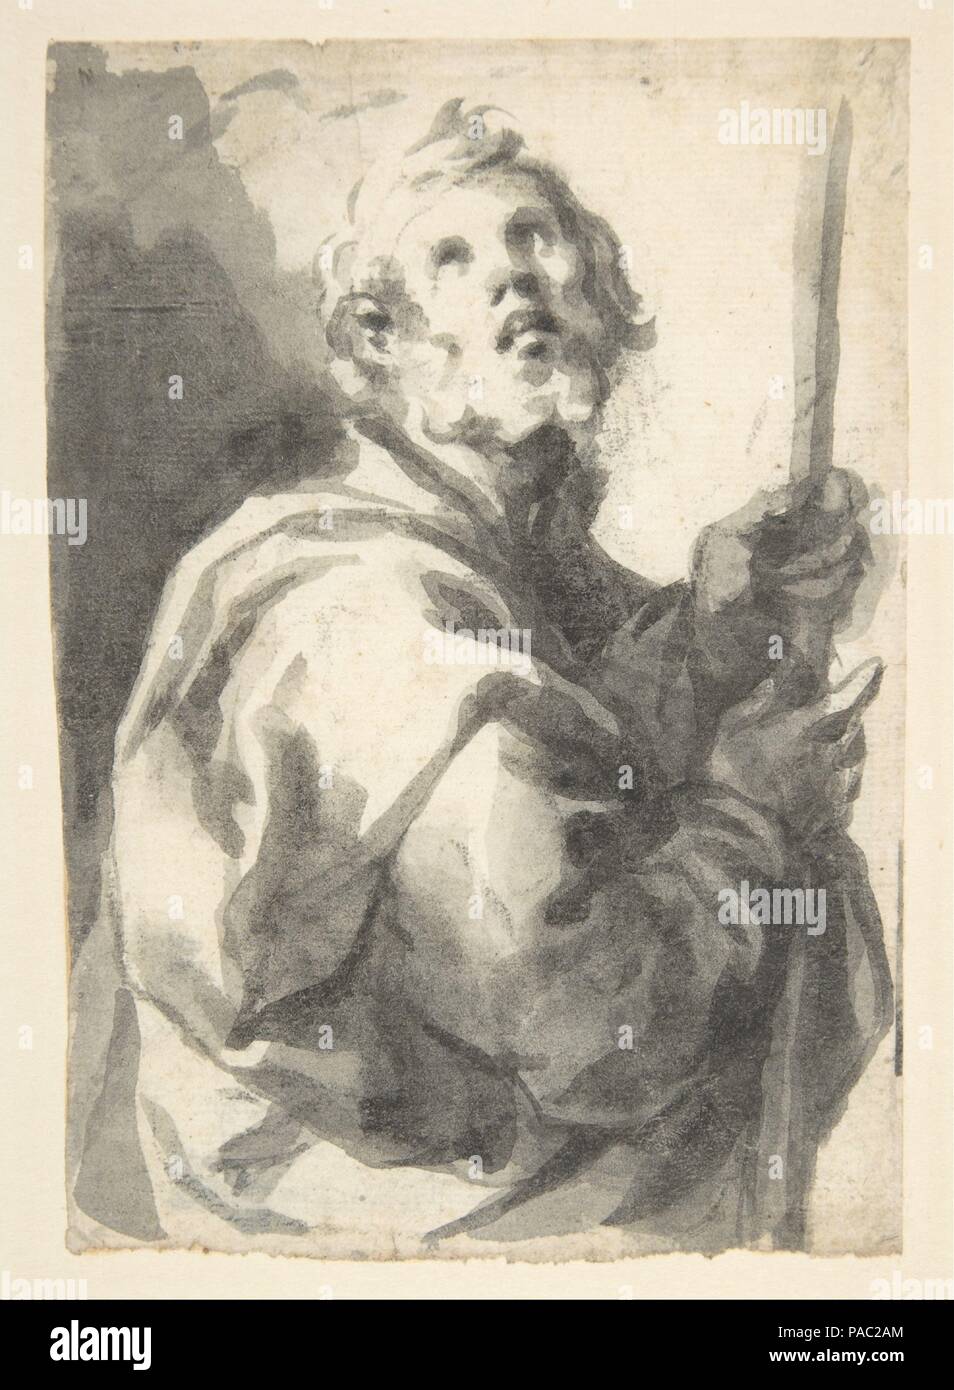 Male Saint with Staff, Half-Figure. Artist: Attributed to Francisco Herrera, the Younger ('El Mozo') (Spanish, Seville 1627-1685 Madrid). Dimensions: 6-1/16 x 4-1/2 in.  (15.4 x 11.4 cm). Date: 1640. Museum: Metropolitan Museum of Art, New York, USA. Stock Photo